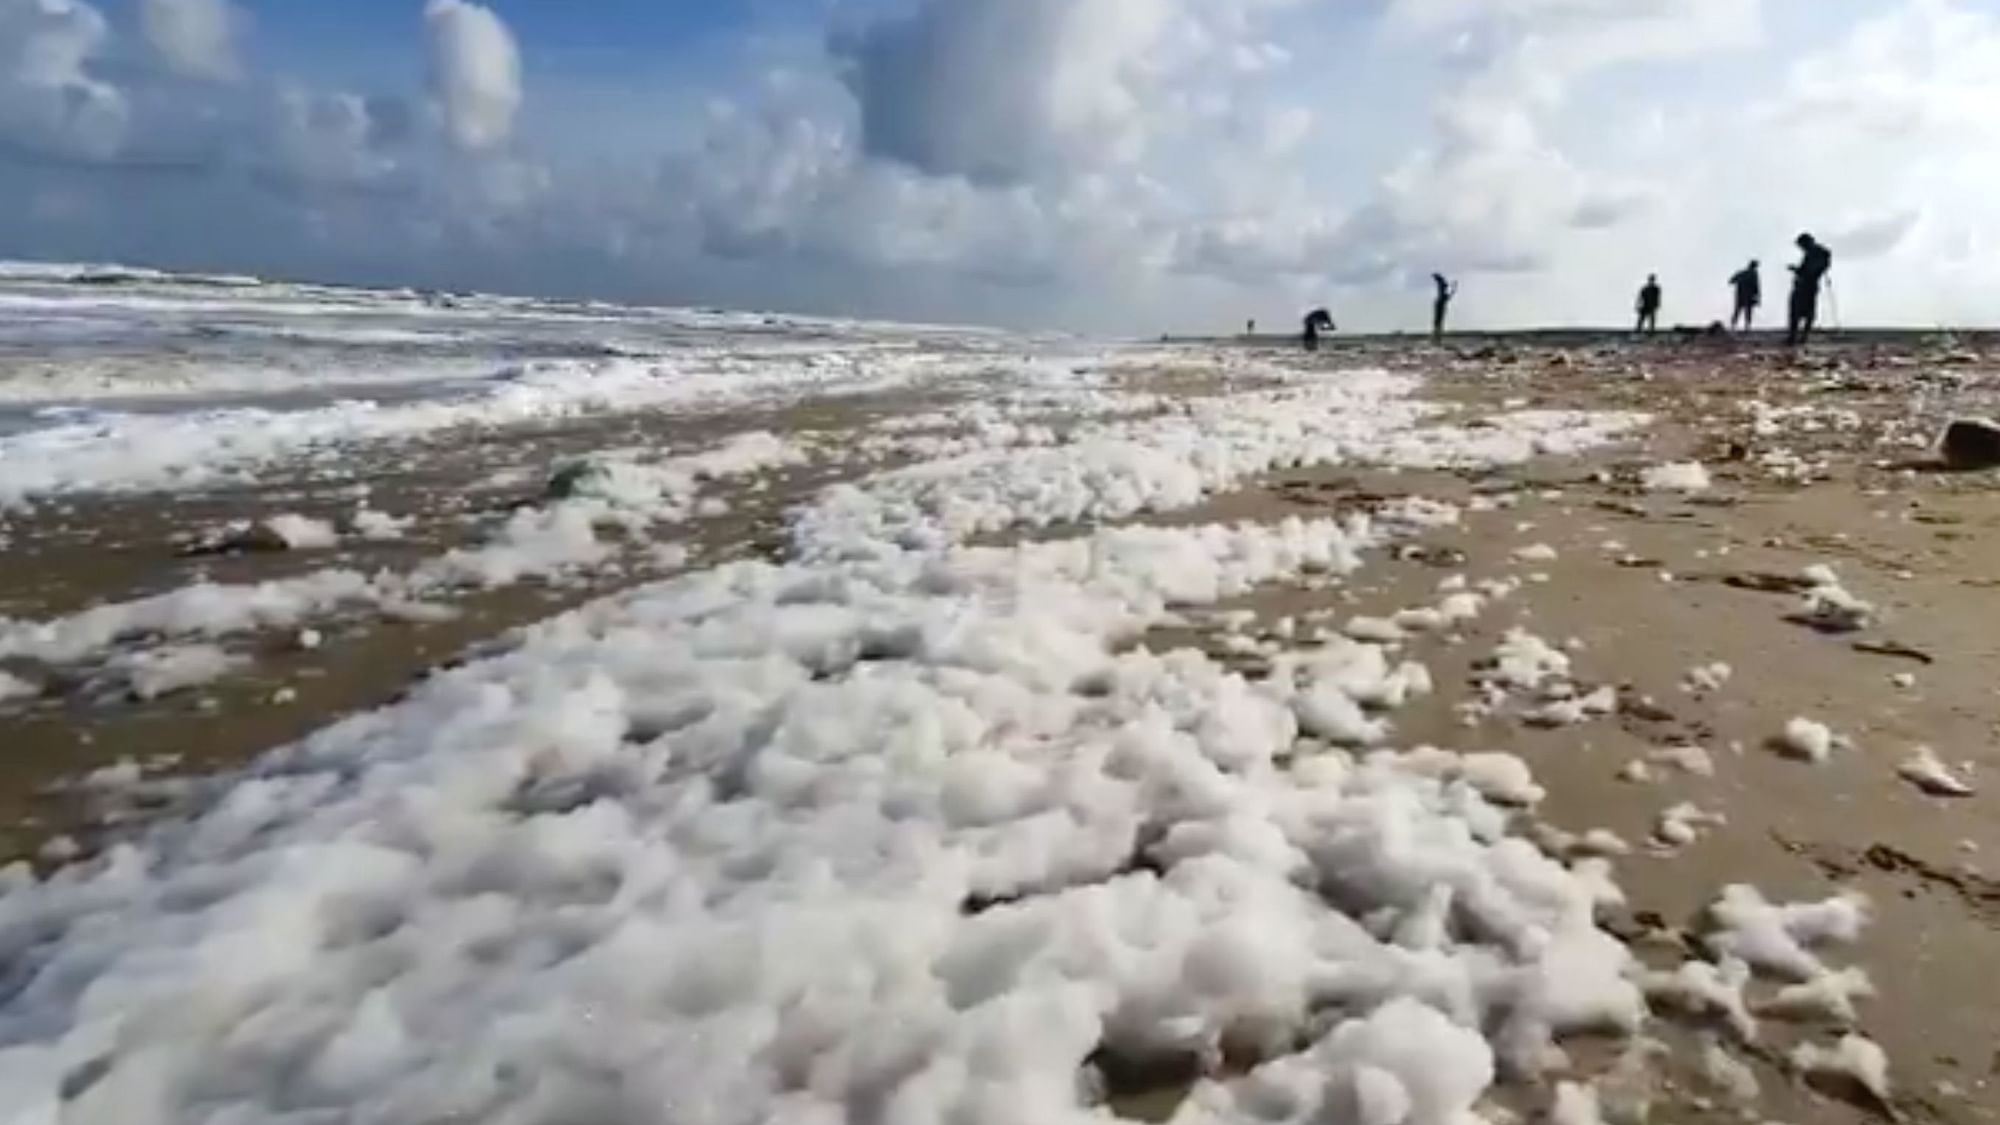 Following heavy rains, a lot of froth was formed along the Foreshore estate coastline in Chennai on Friday.